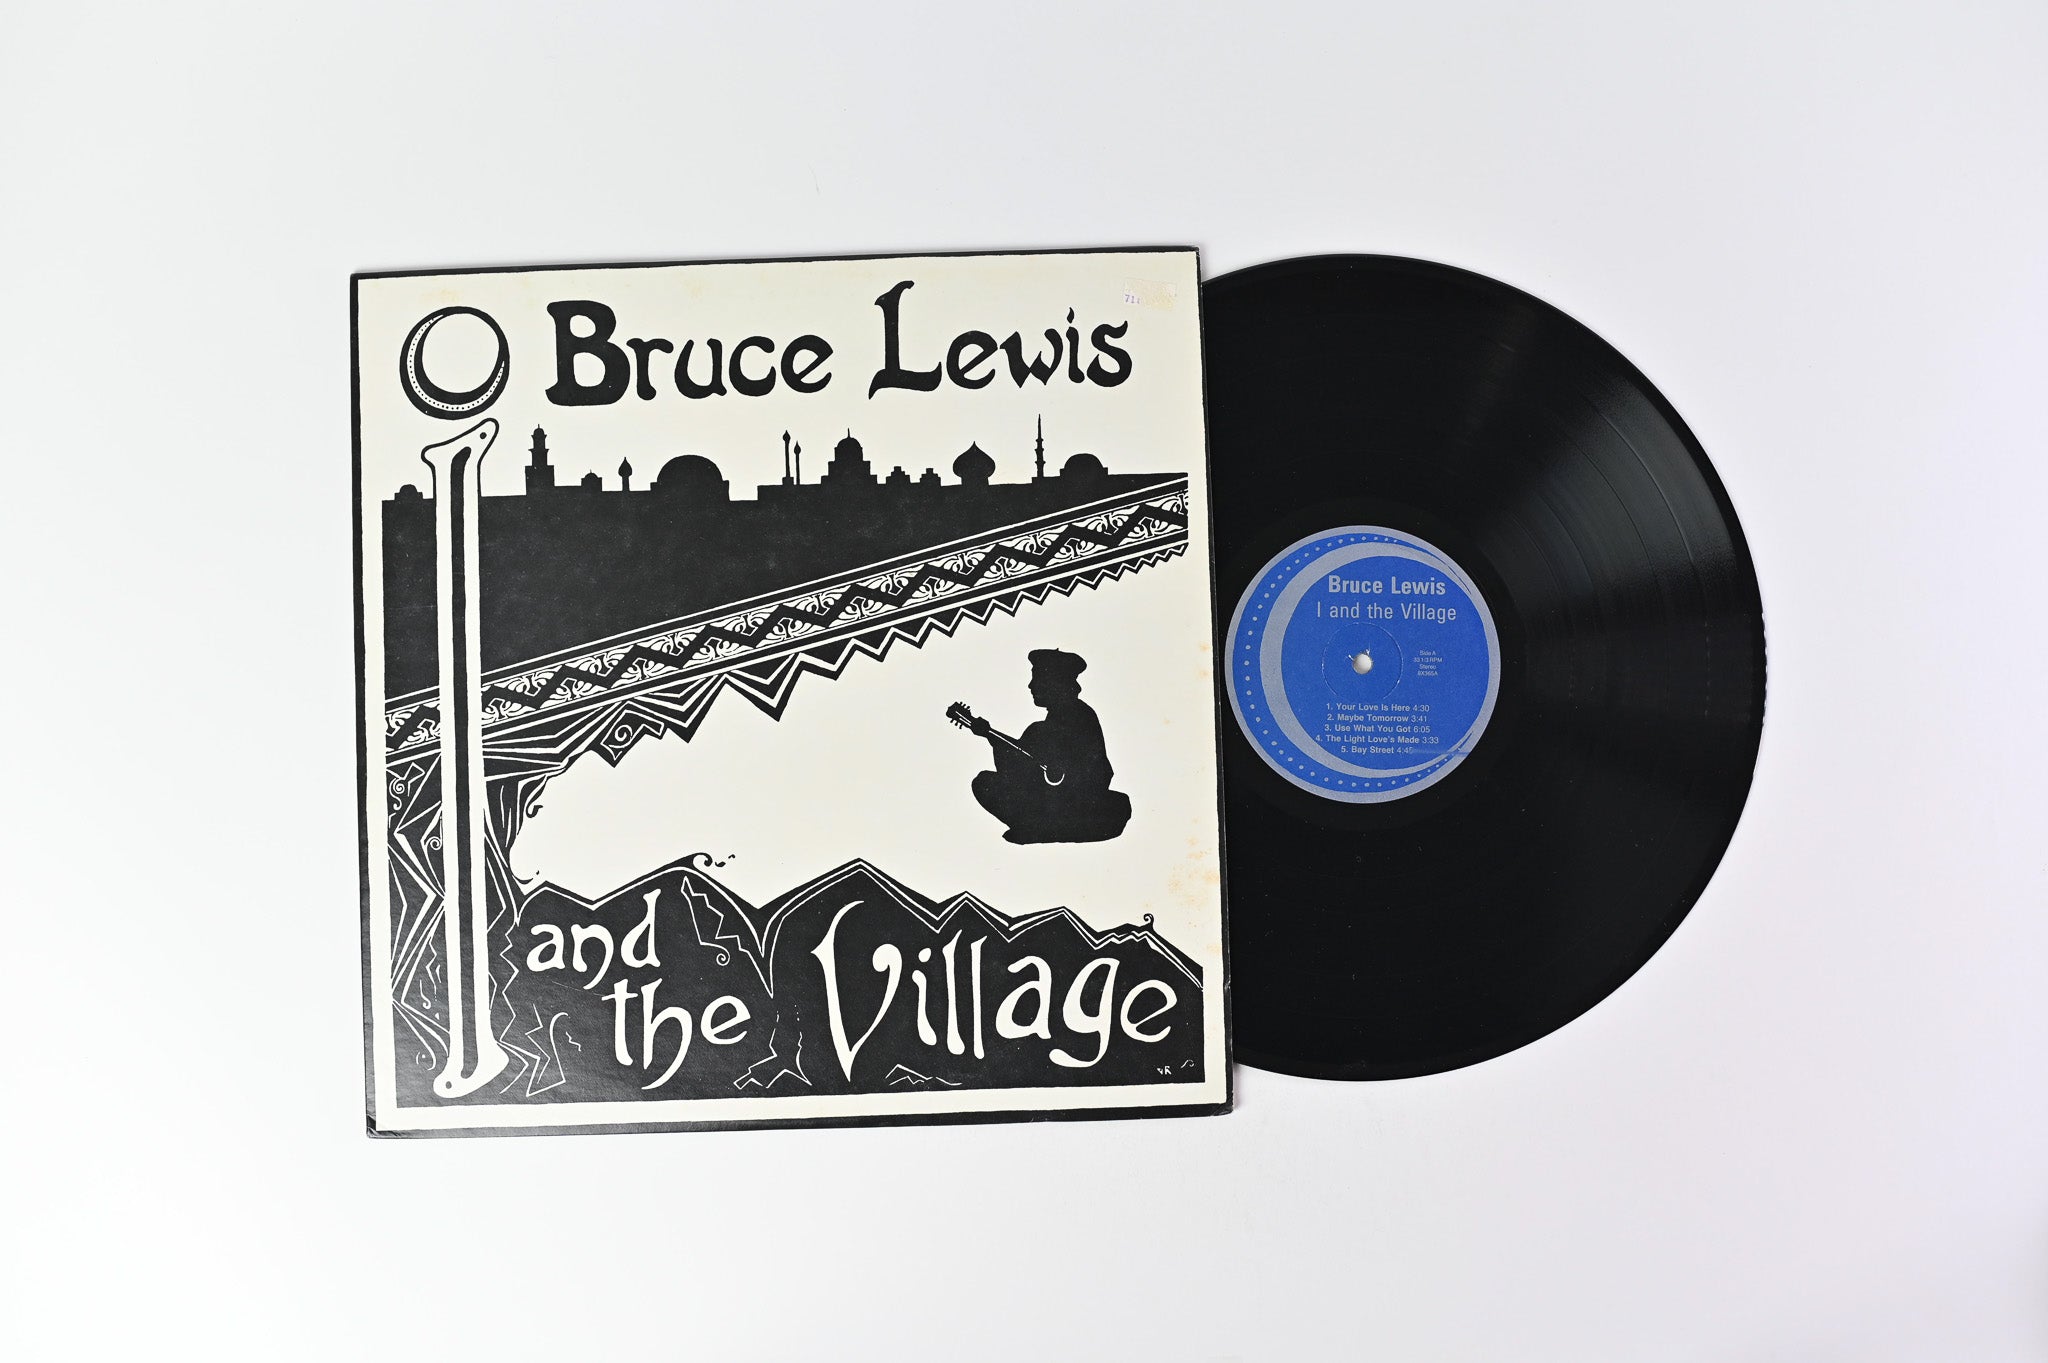 Bruce Lewis - I And The Village